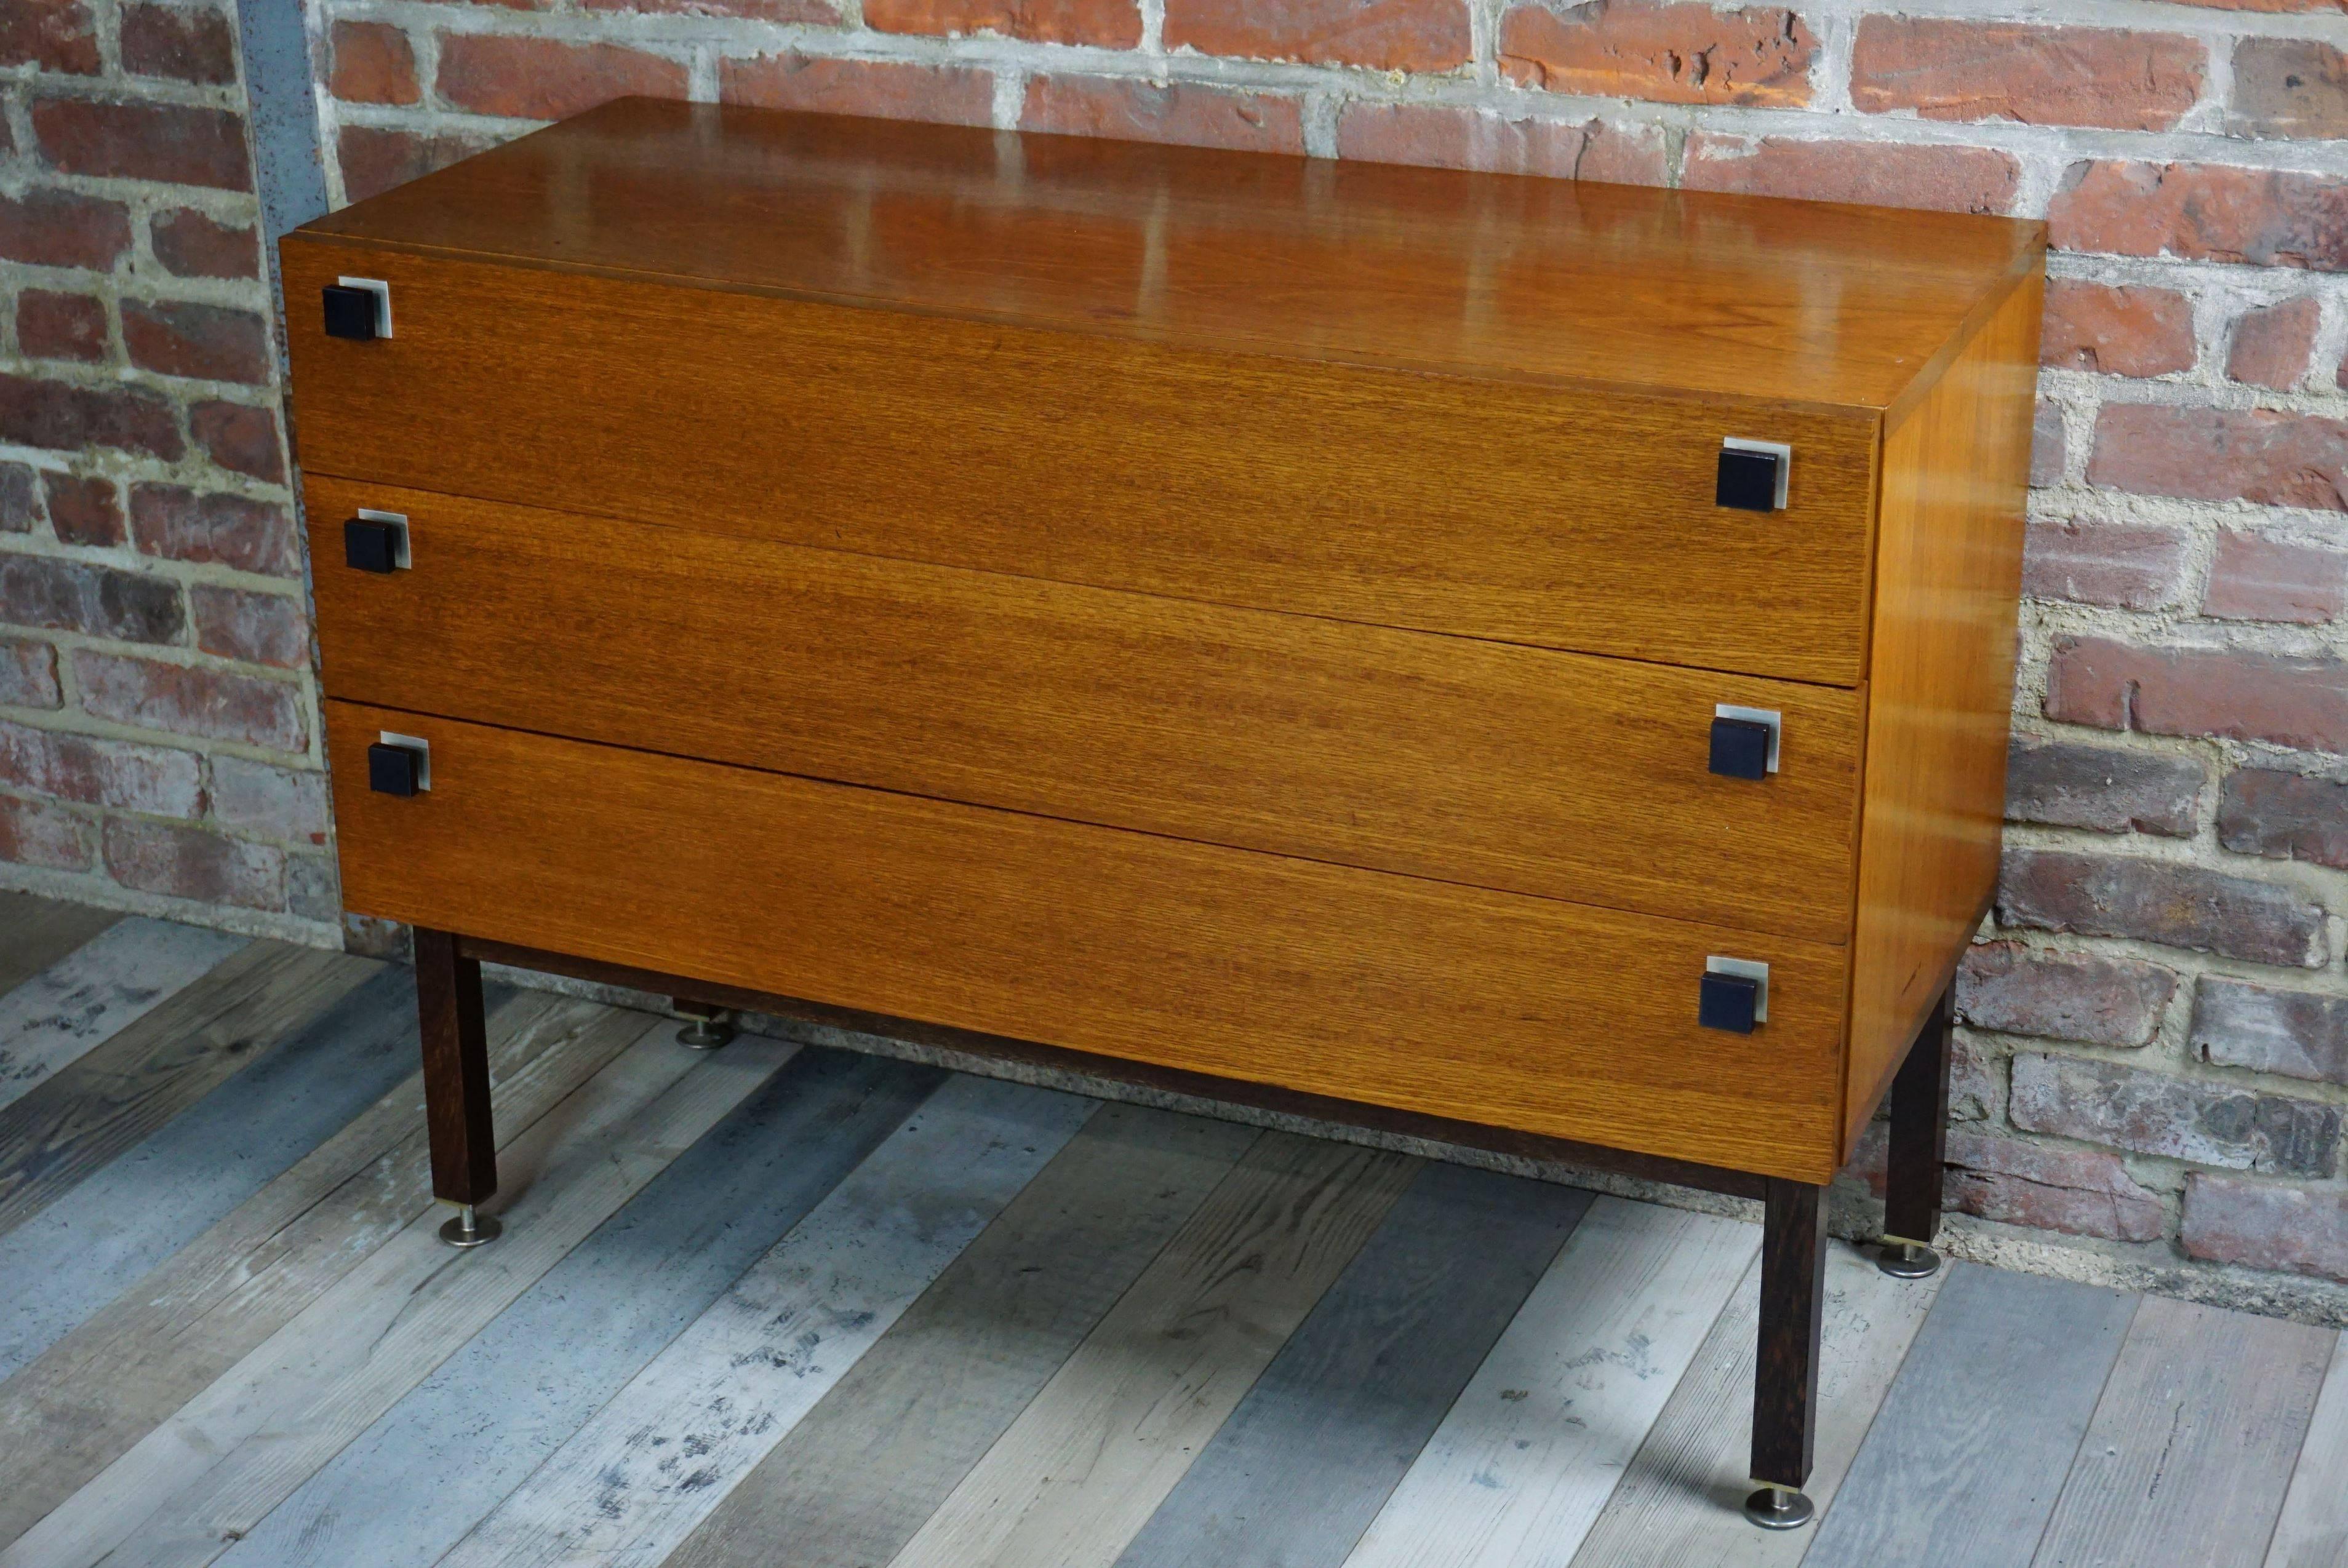 Design, vintage and practical chest of drawers of the 1950s-1960s by the Dutch house Combineurop. It consists of 3 large drawers, a teak structure, black metal handles, sober lines, minimalist, angular and squared section base.